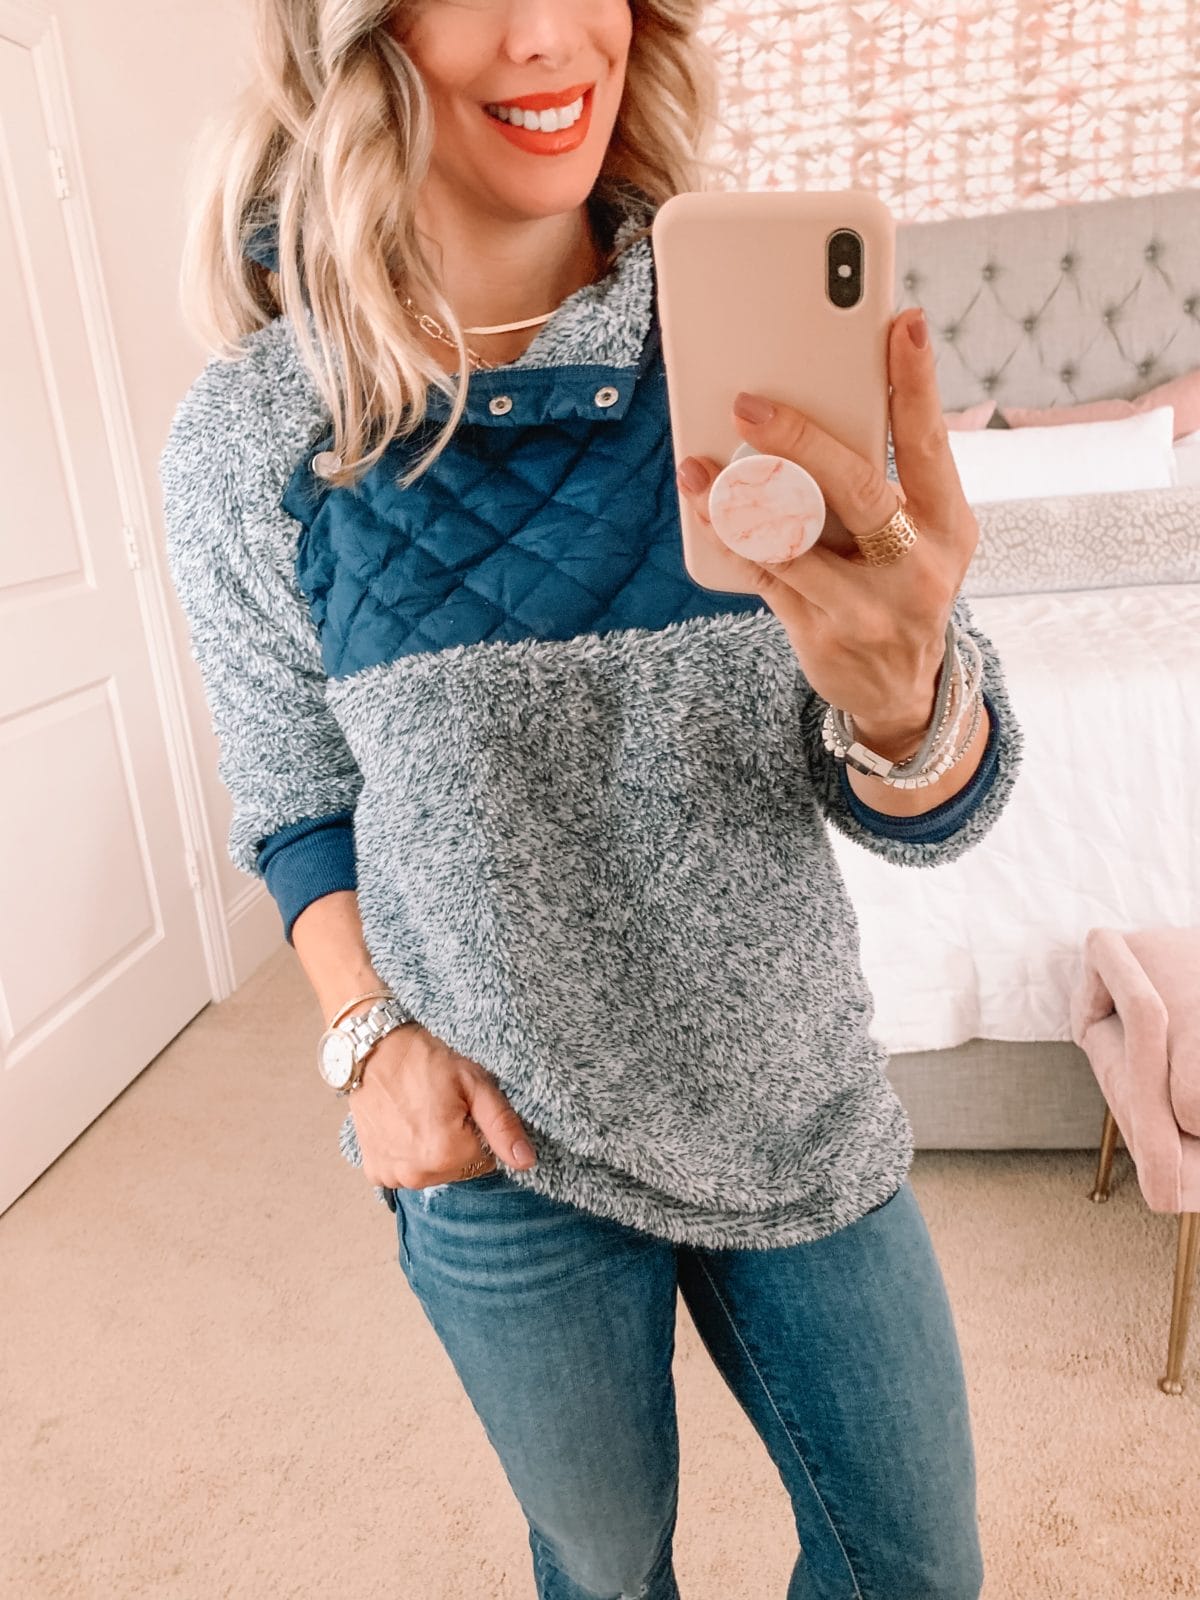 Amazon Fashion Faves, pullover, jeans, booties 